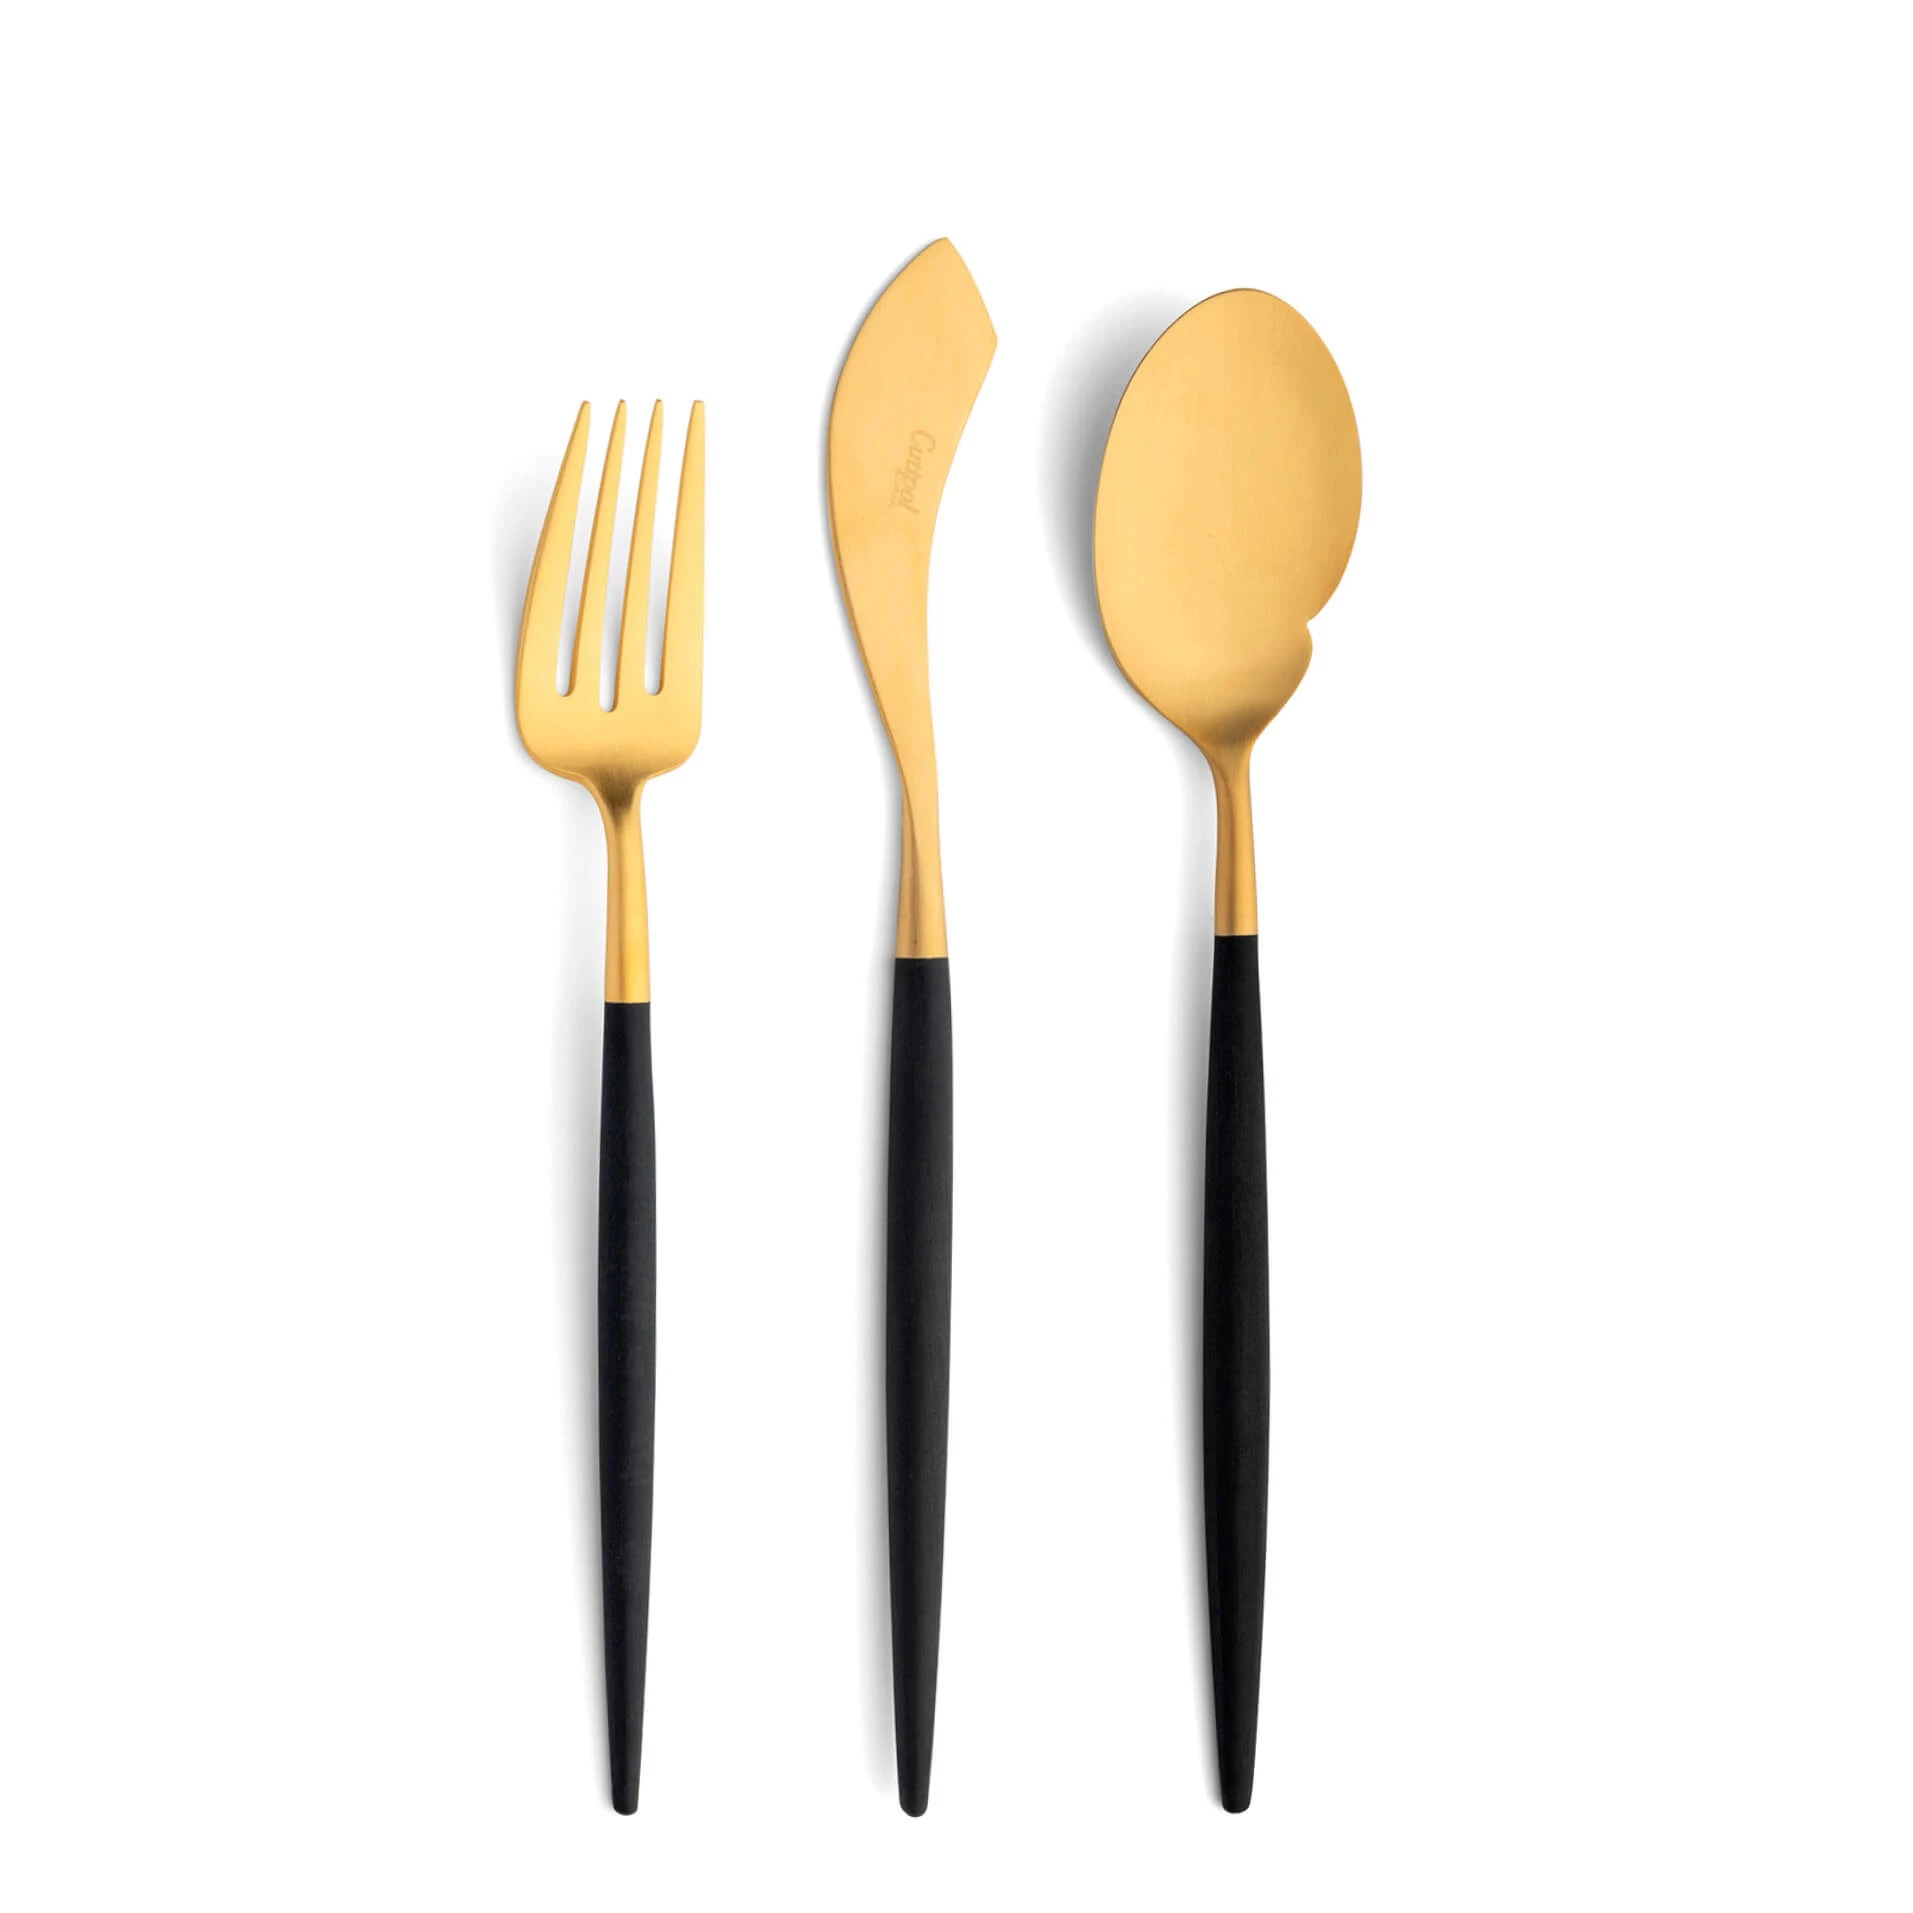 Cutipol Cutlery Goa Gold with fish fork, fish knife and gourmet spoon